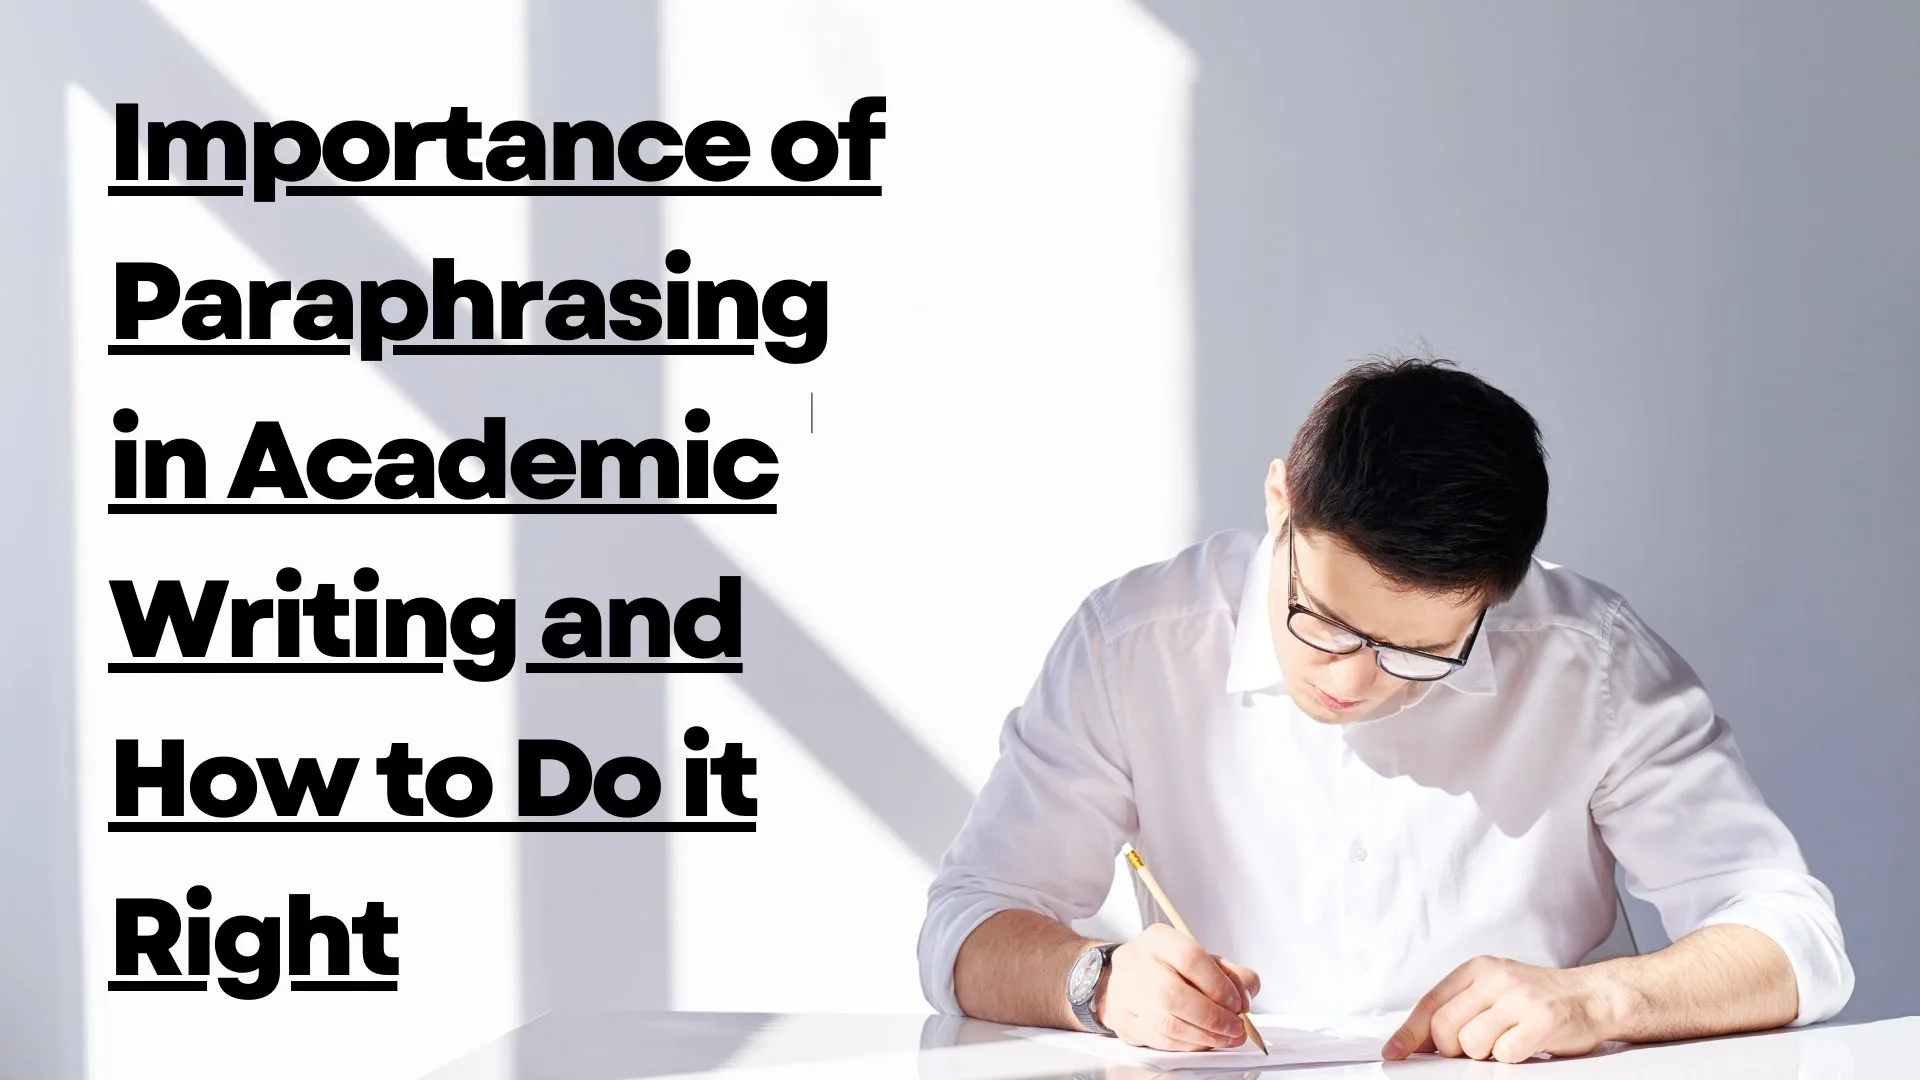 Is Paraphrasing Helpful in Academic Writing? Tips to Do It Quickly